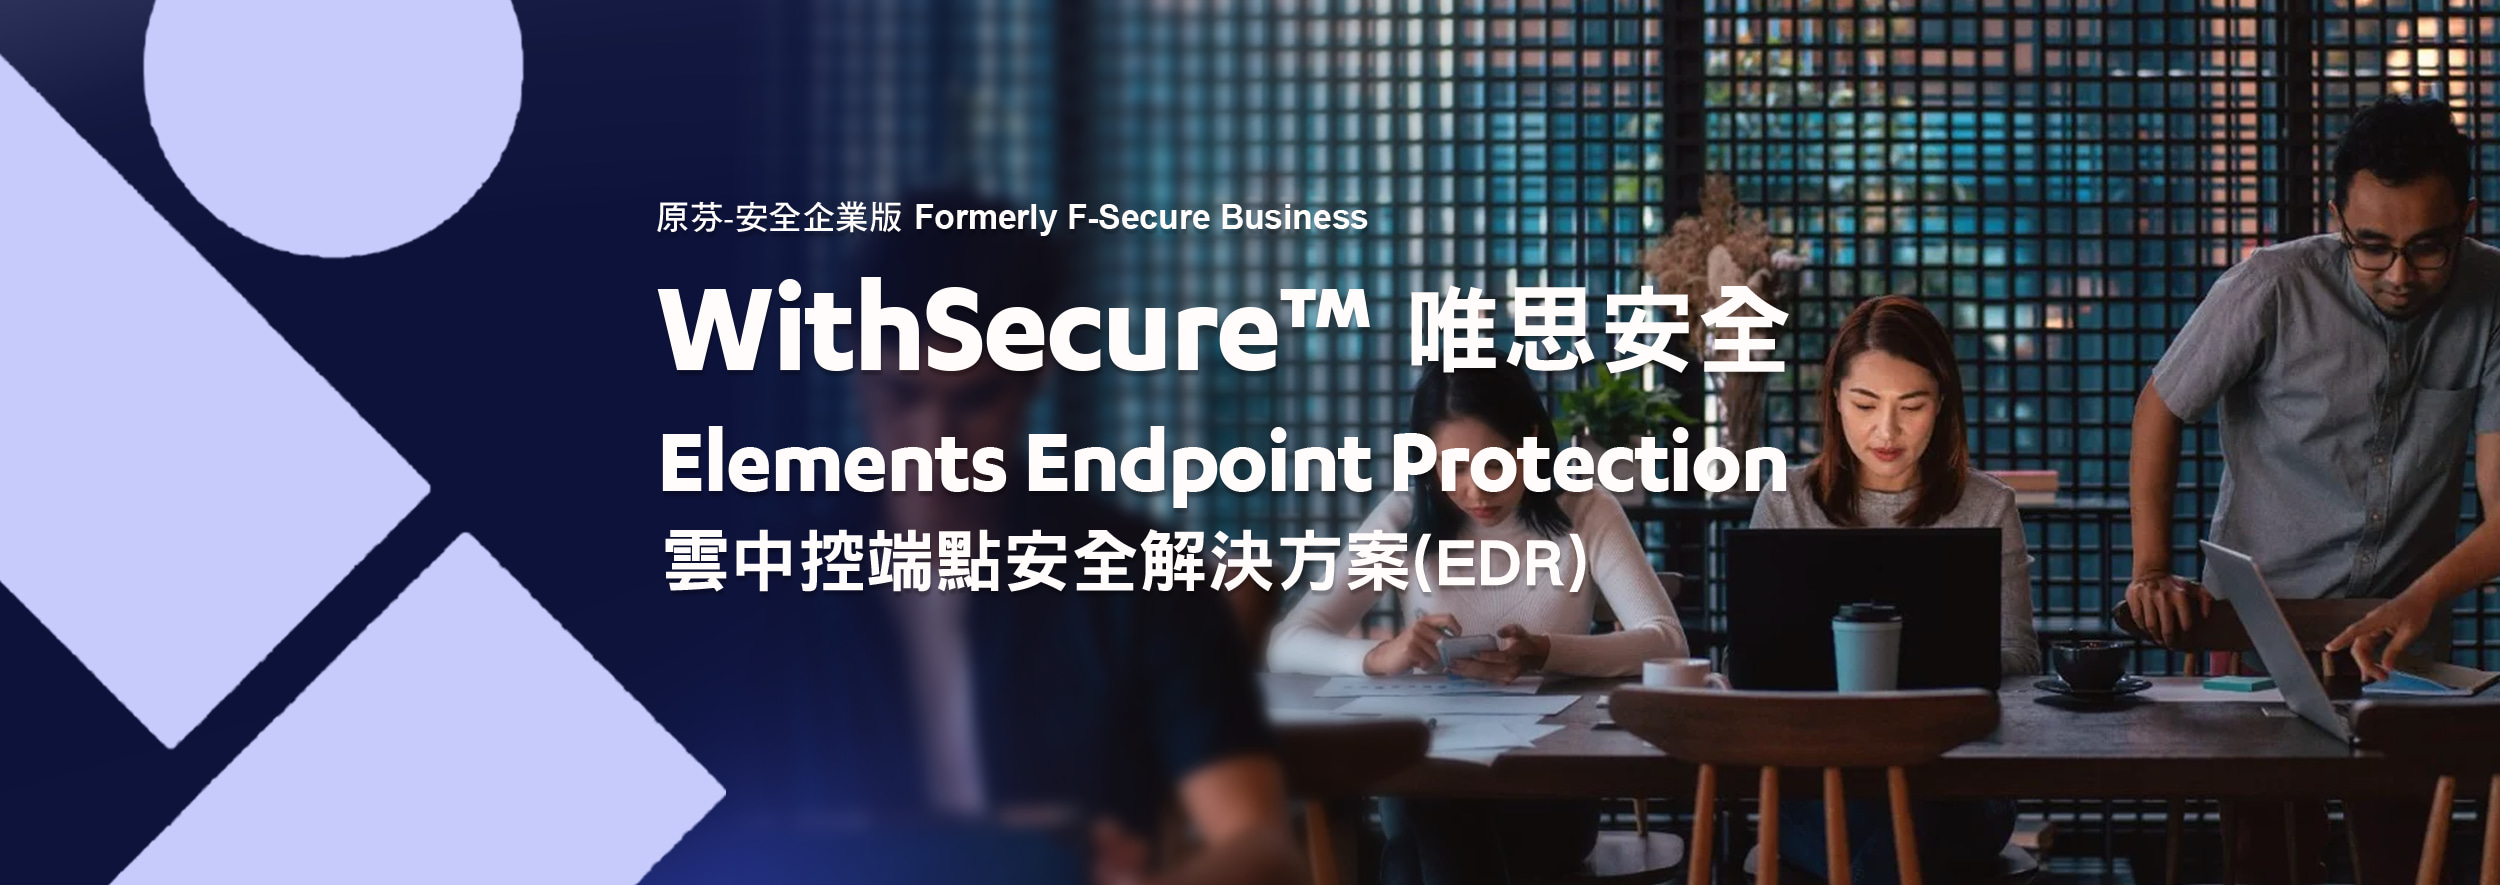 WithSecure EPP